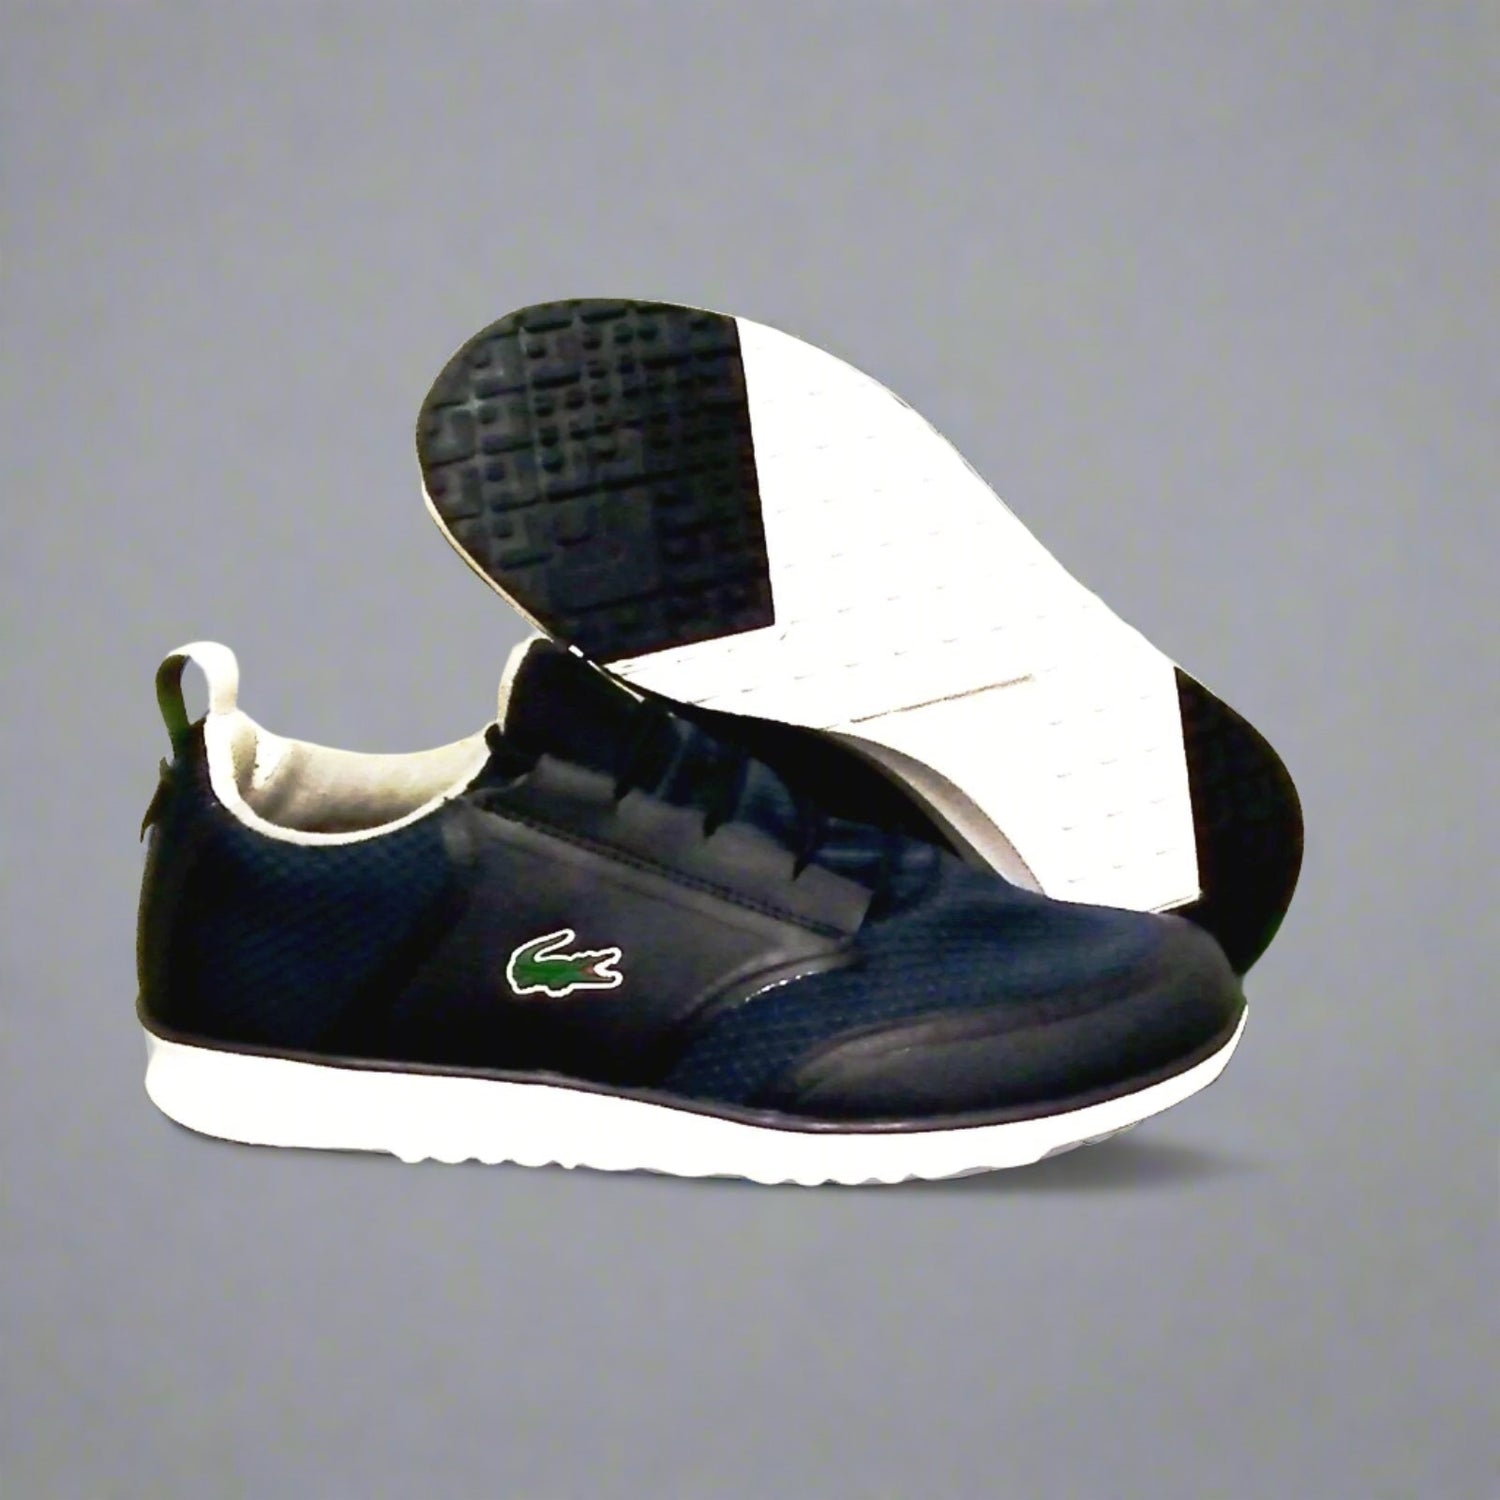 Lacoste shoes L.IGHT LT12 spm txt/syn dark blue training size 7.5 new with box - Classic Fashion DealsLacoste shoes L.IGHT LT12 spm txt/syn dark blue training size 7.5 new with boxlacoste shoesClassic Fashion DealsLacoste shoes L.IGHT LT12 spm txt/syn dark blue training size 7.5 new with box